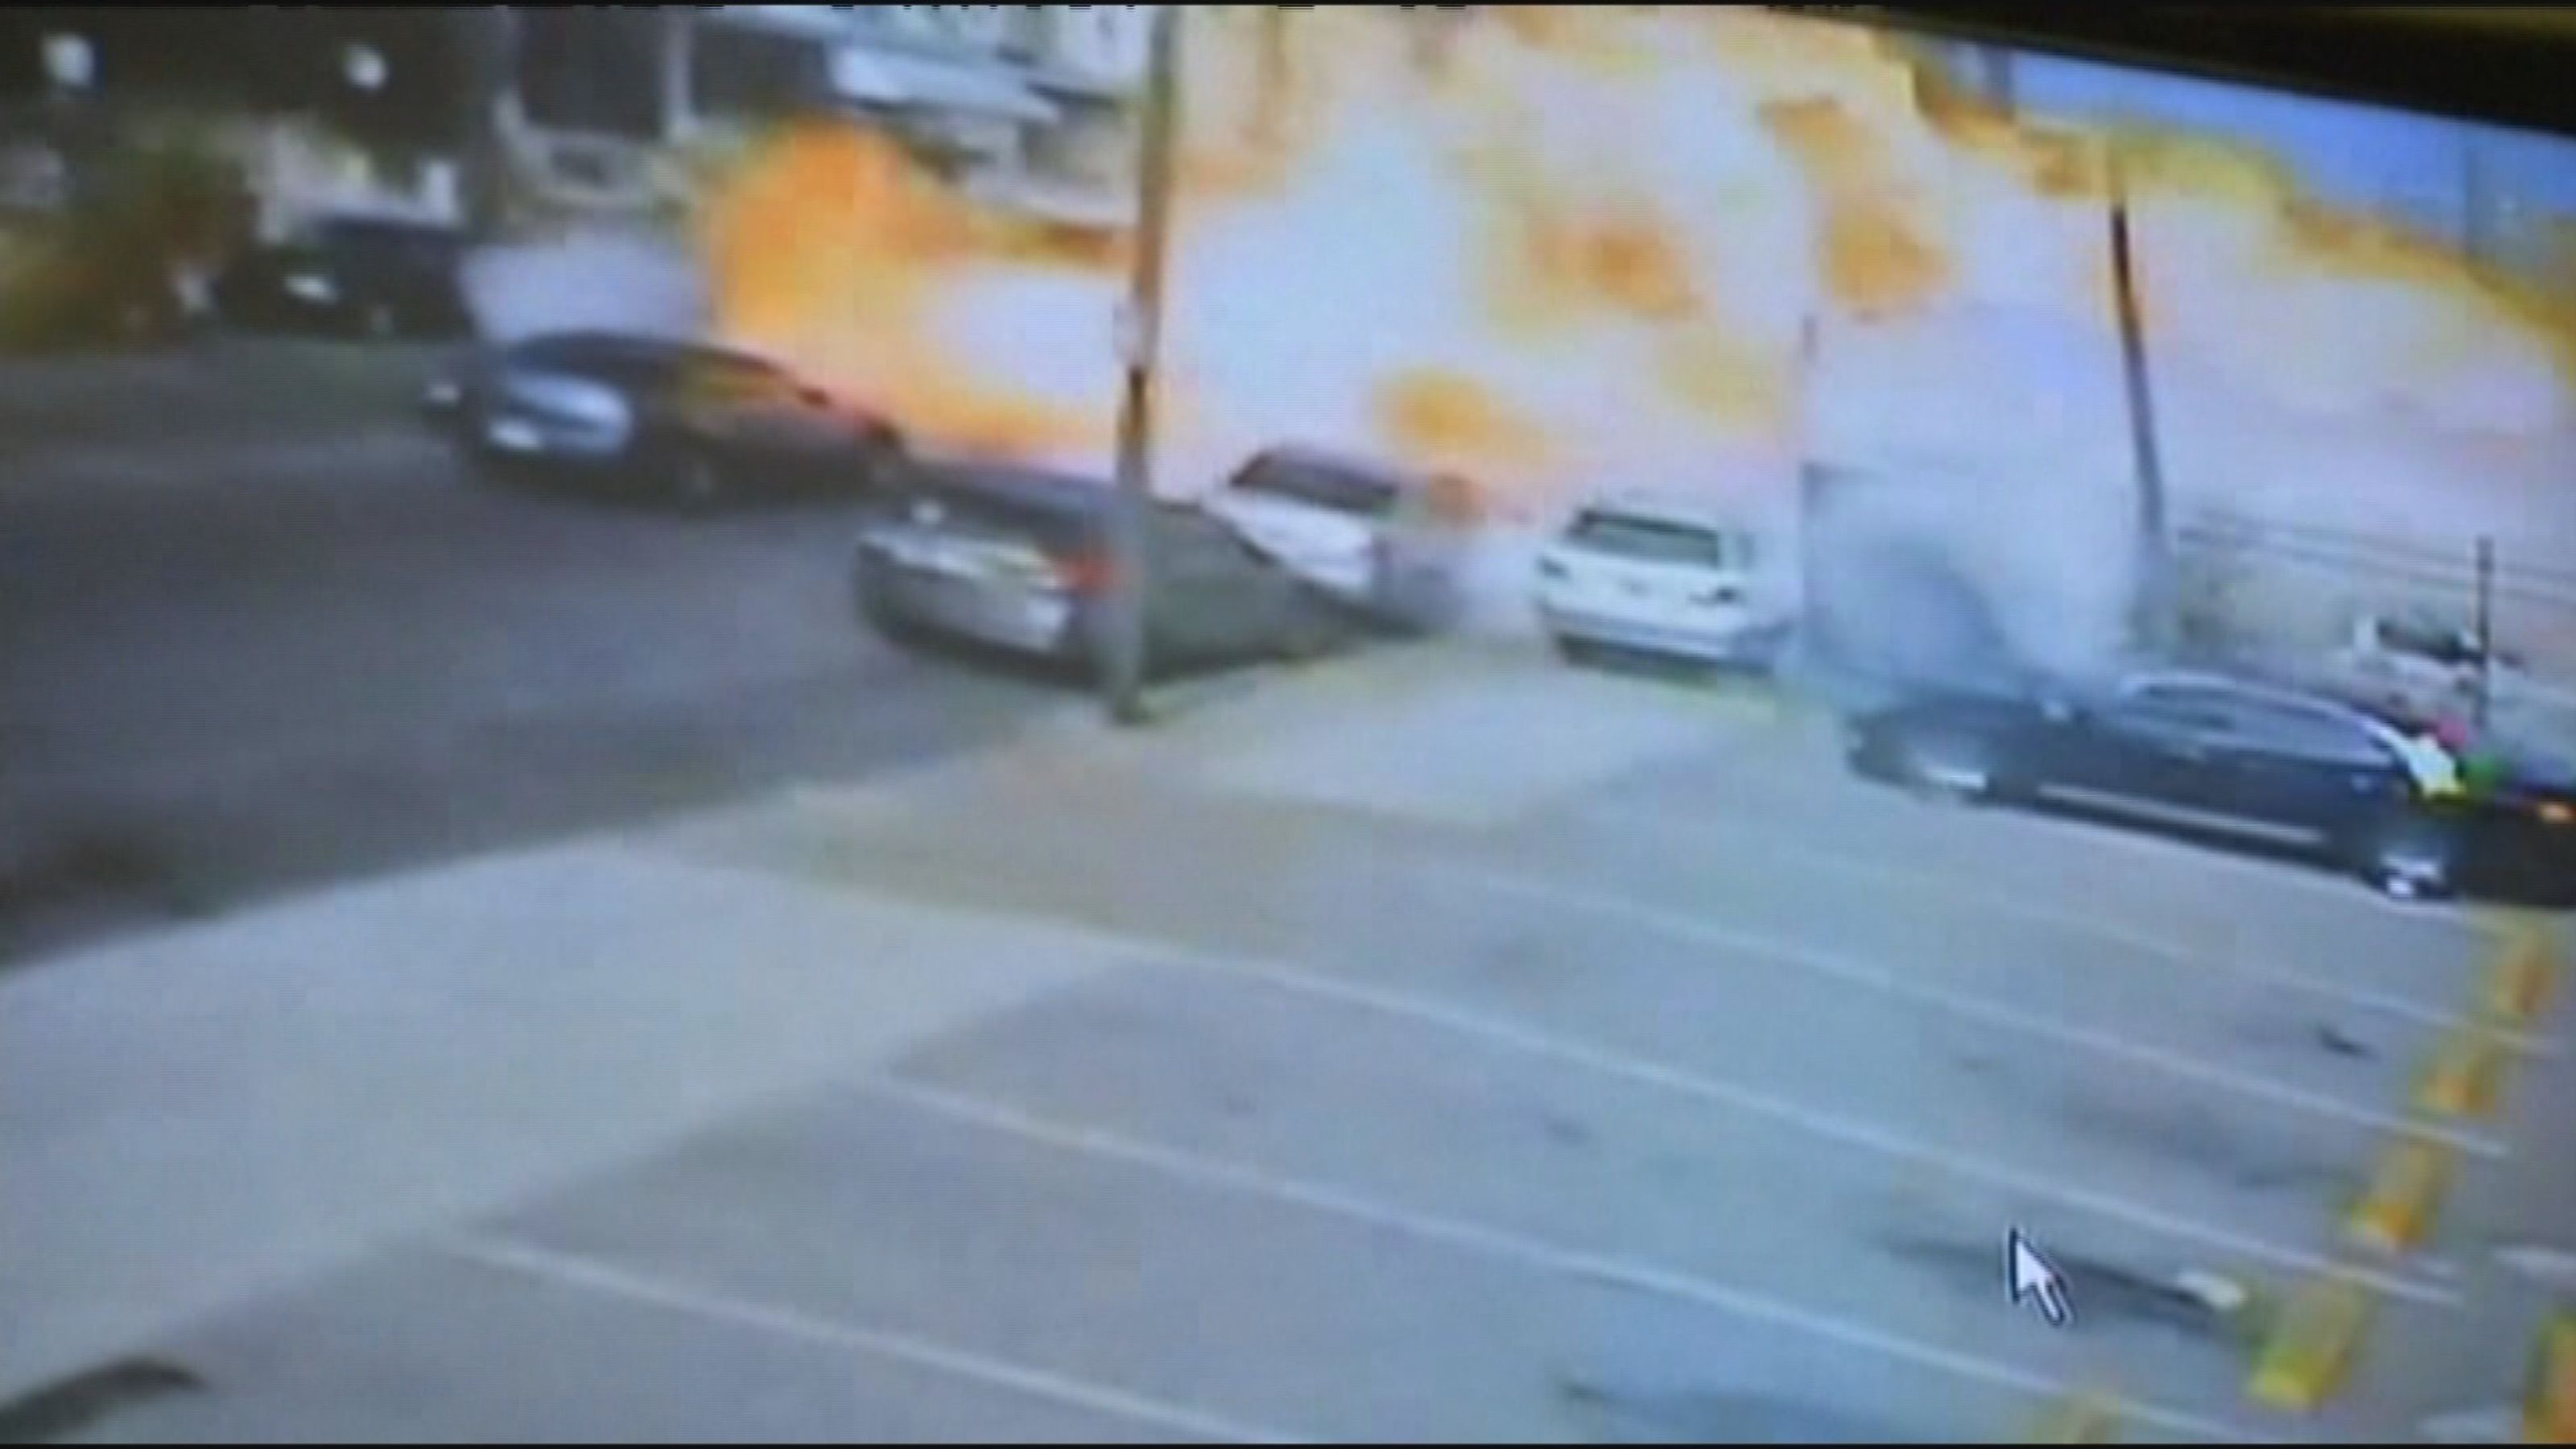 philly propane food truck explosion